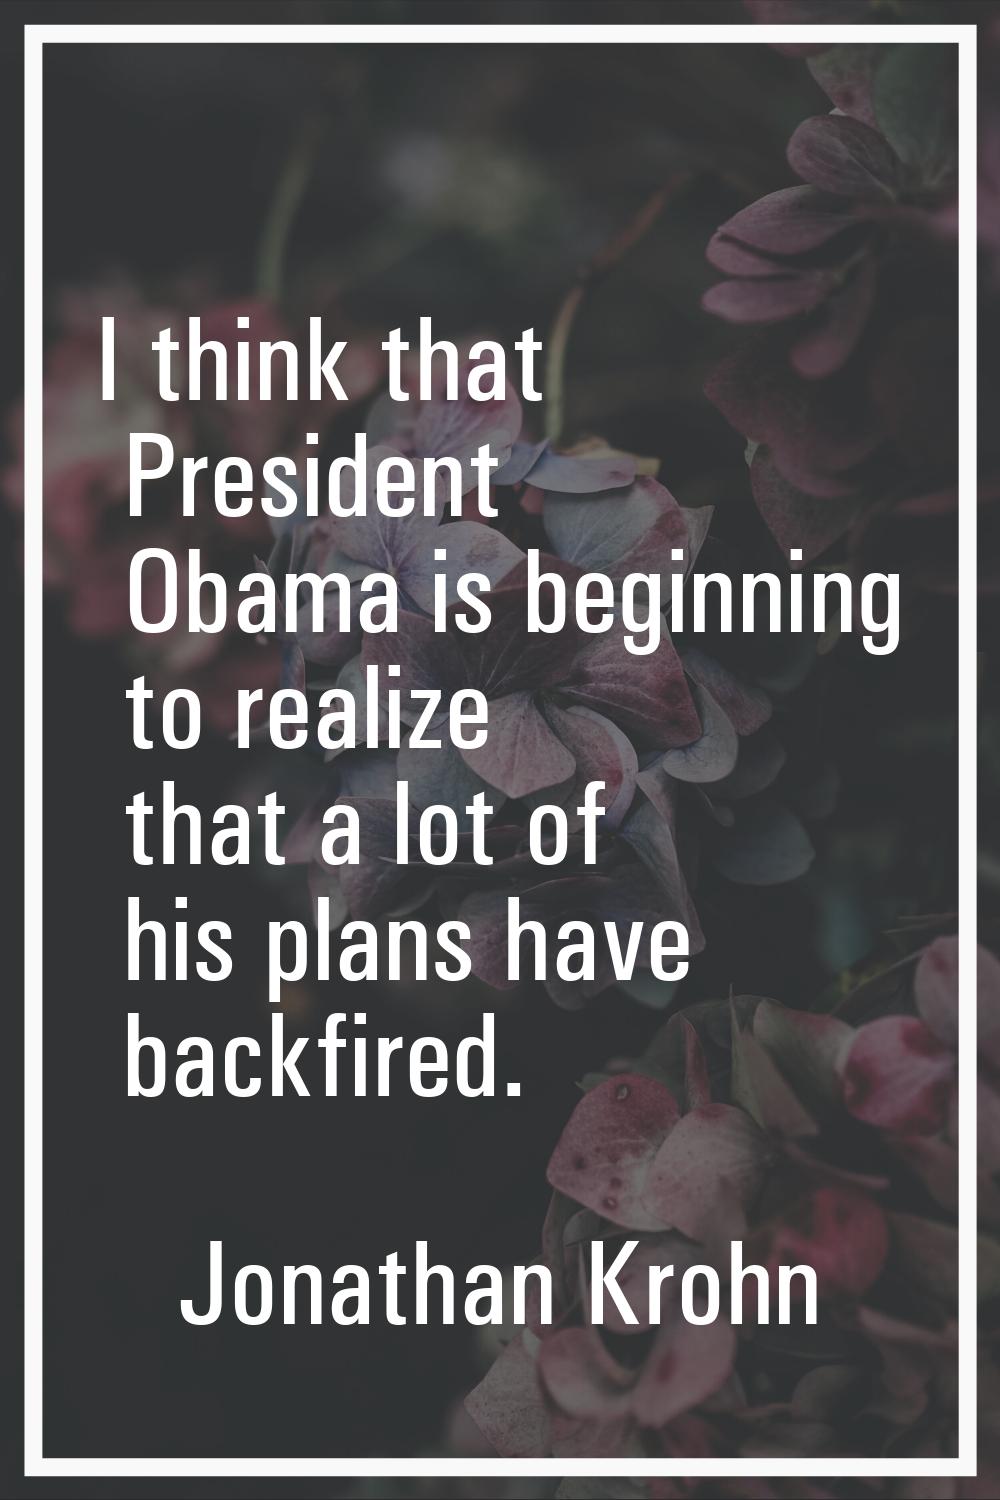 I think that President Obama is beginning to realize that a lot of his plans have backfired.